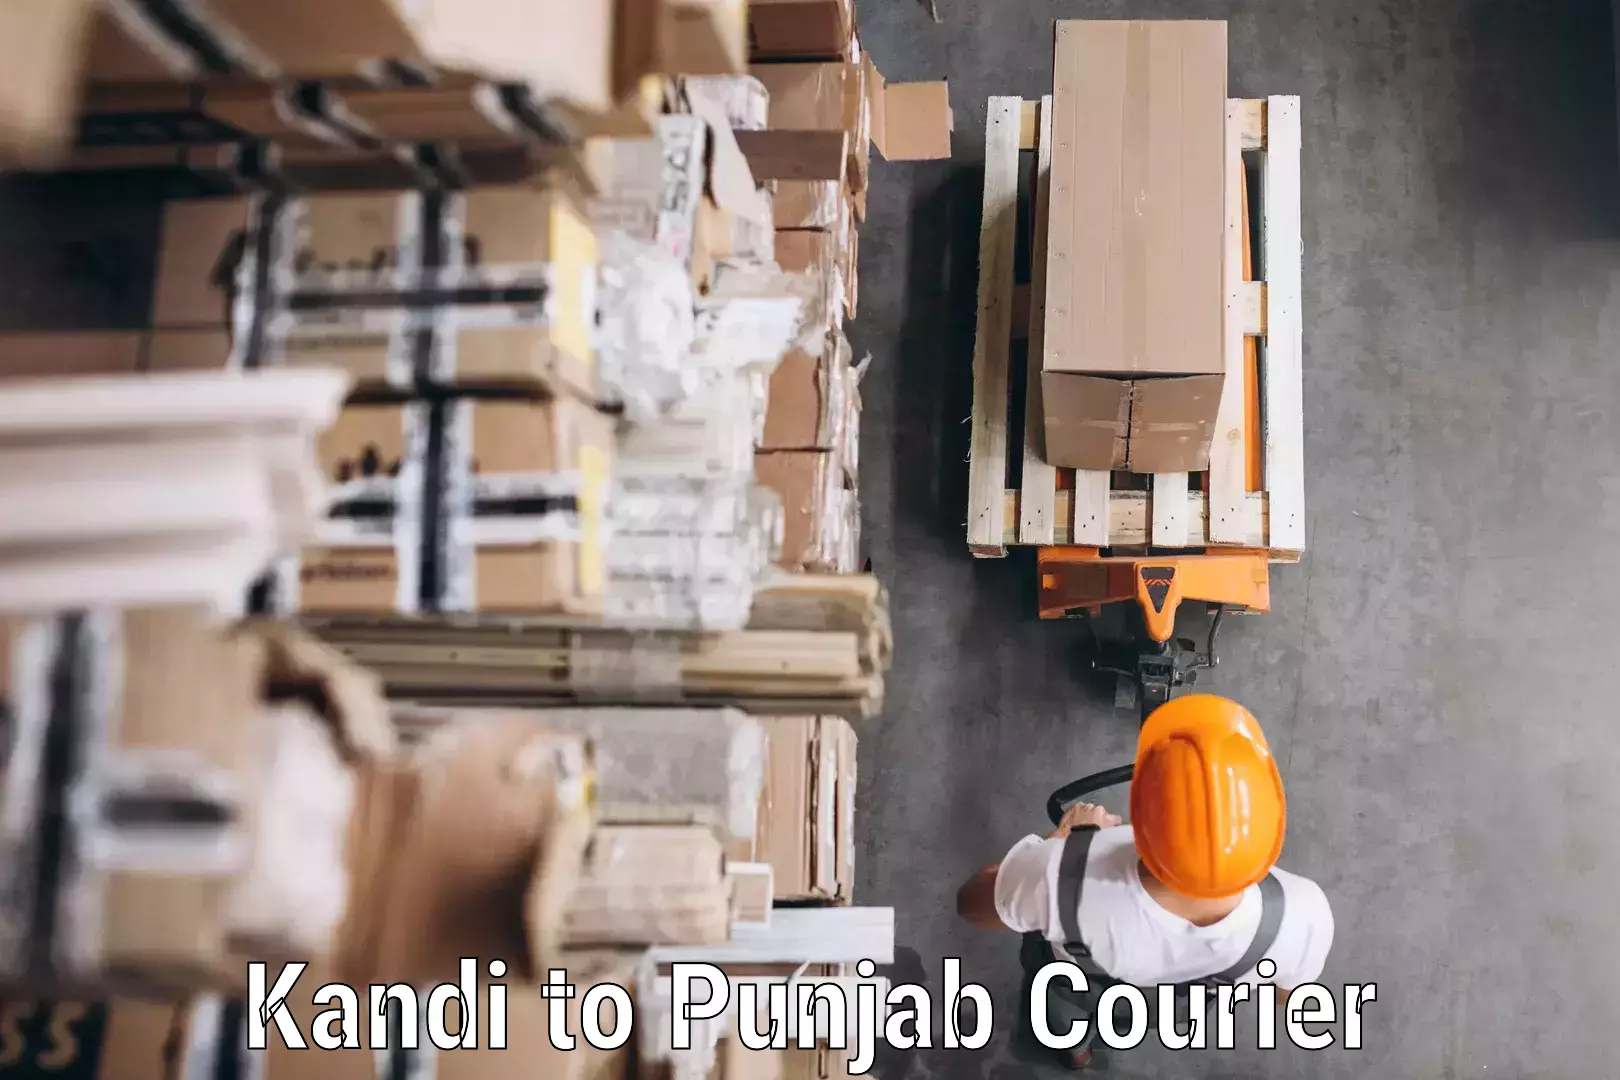 Same-day delivery options in Kandi to Punjab